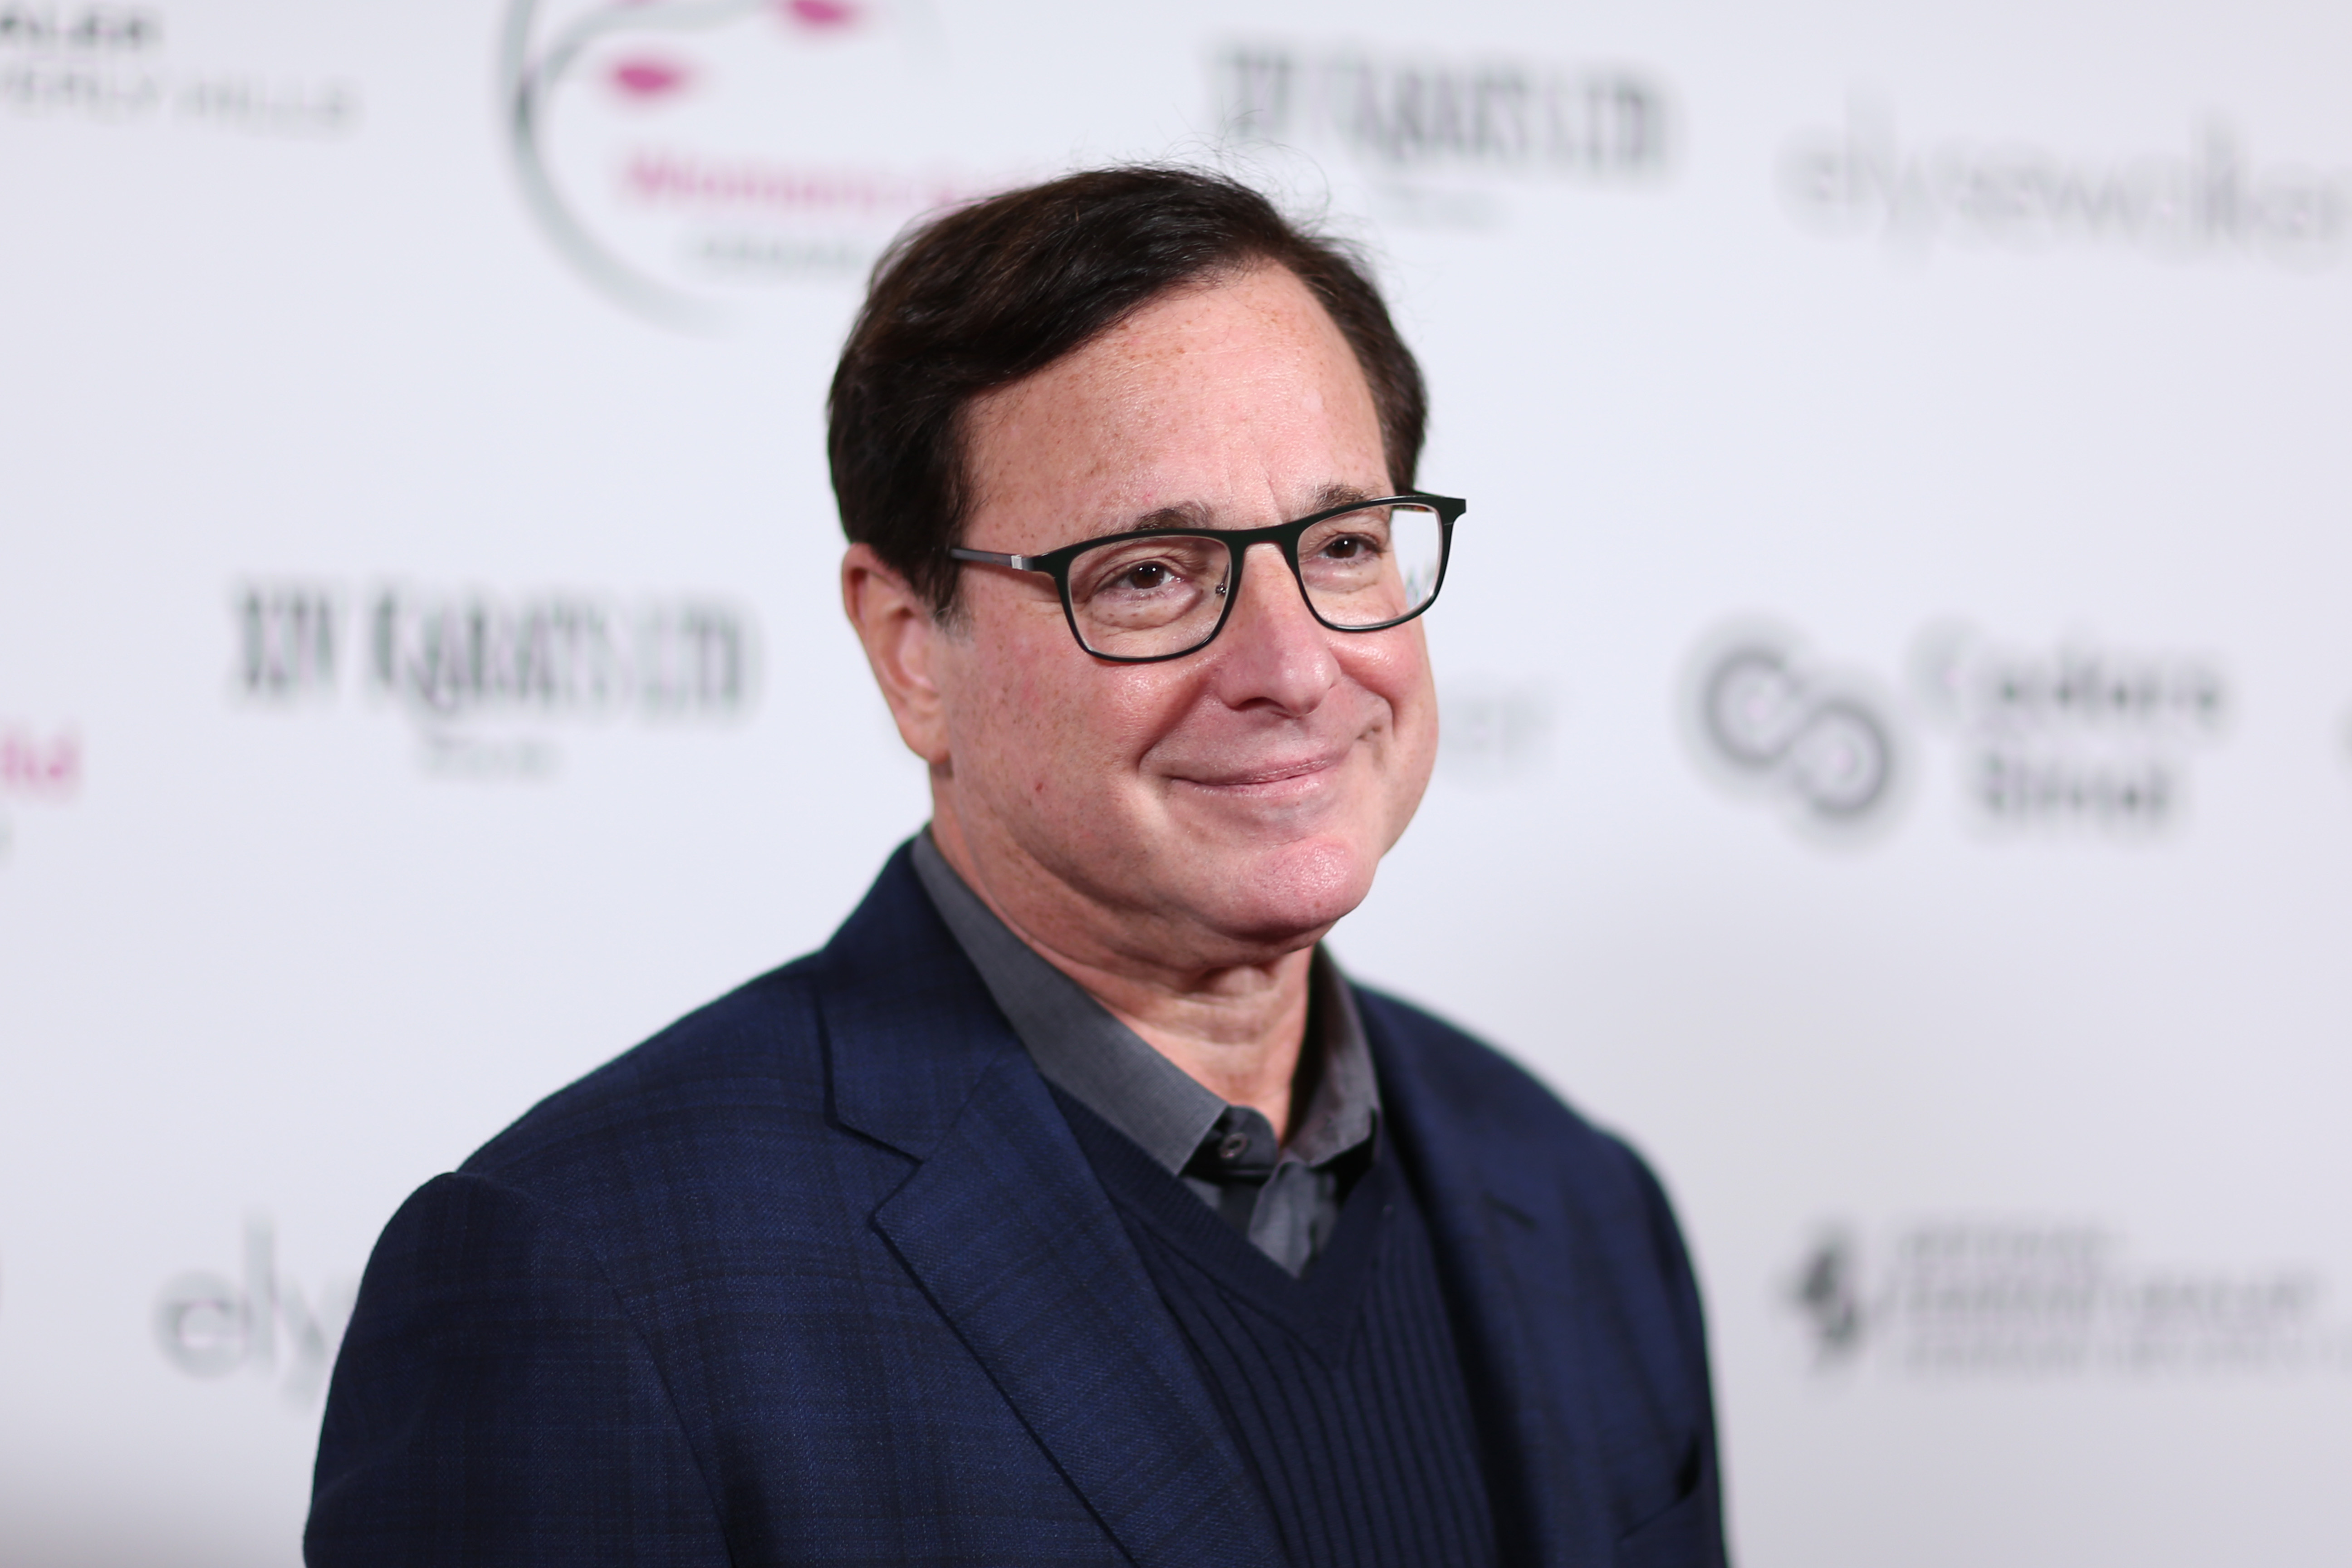 Comedian and 'Full House' star Bob Saget. He's wearing a dark blue suit with a collared shirt and black sweater under it.